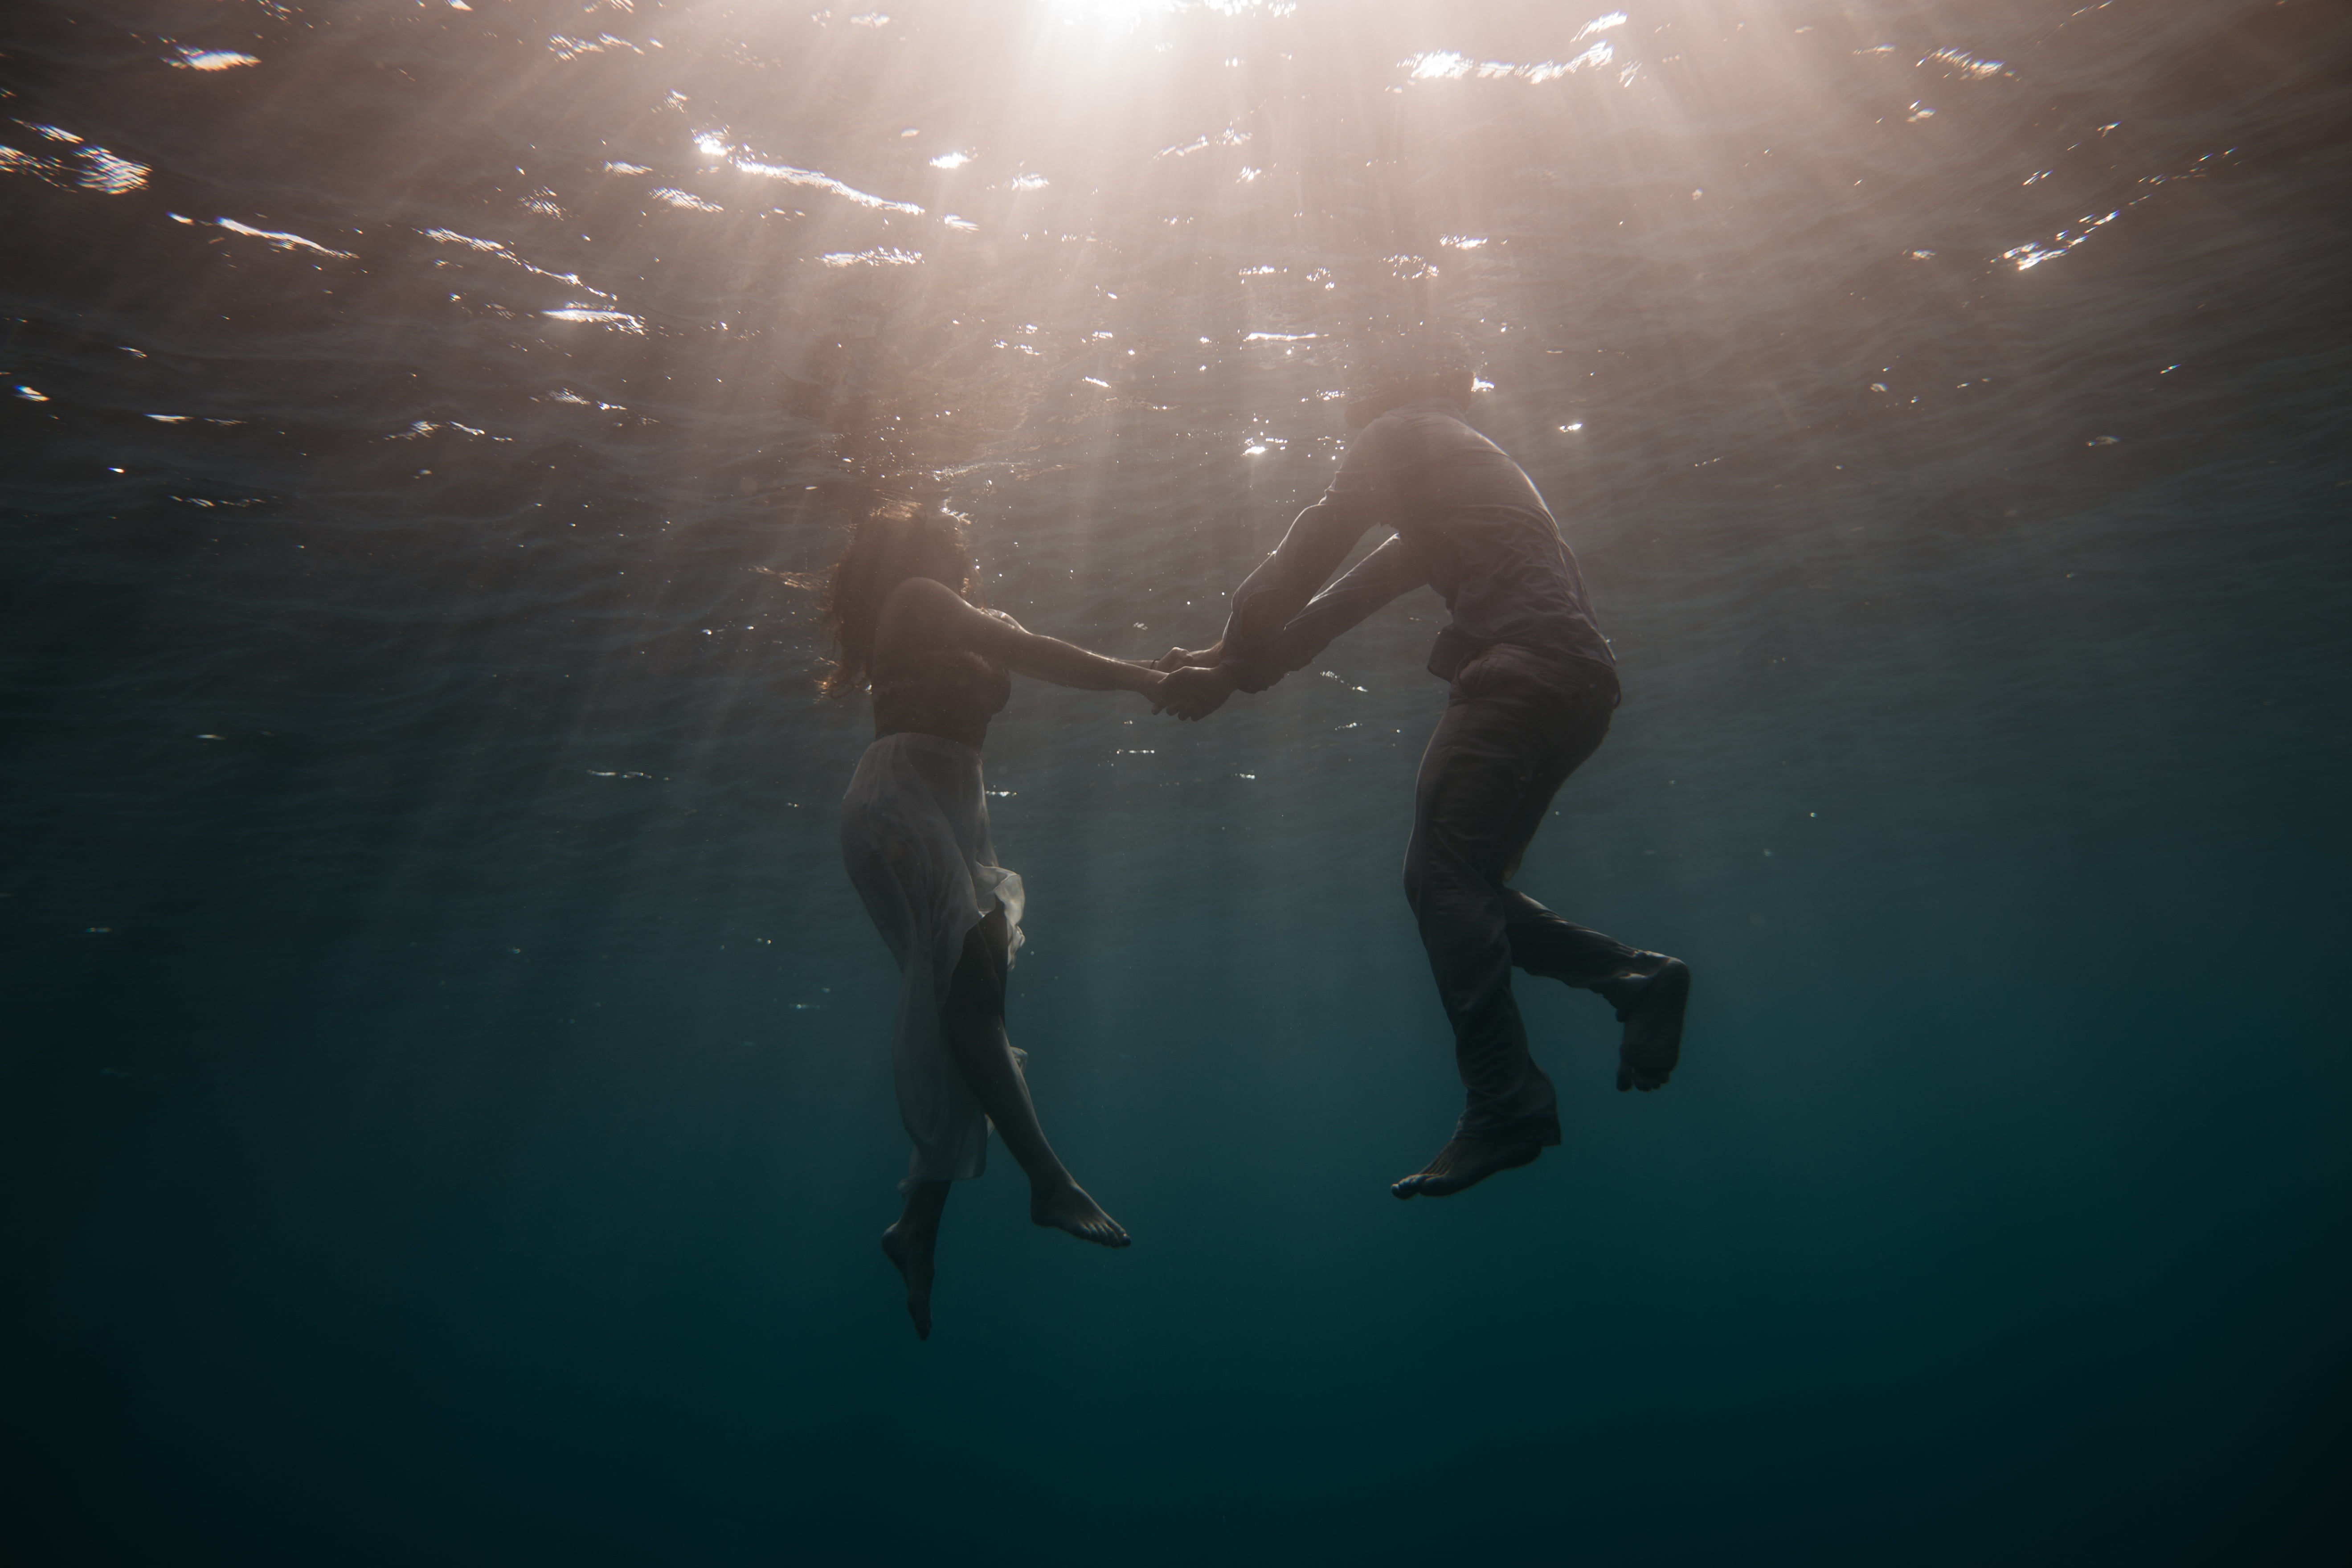 man and woman holding hands under body of water